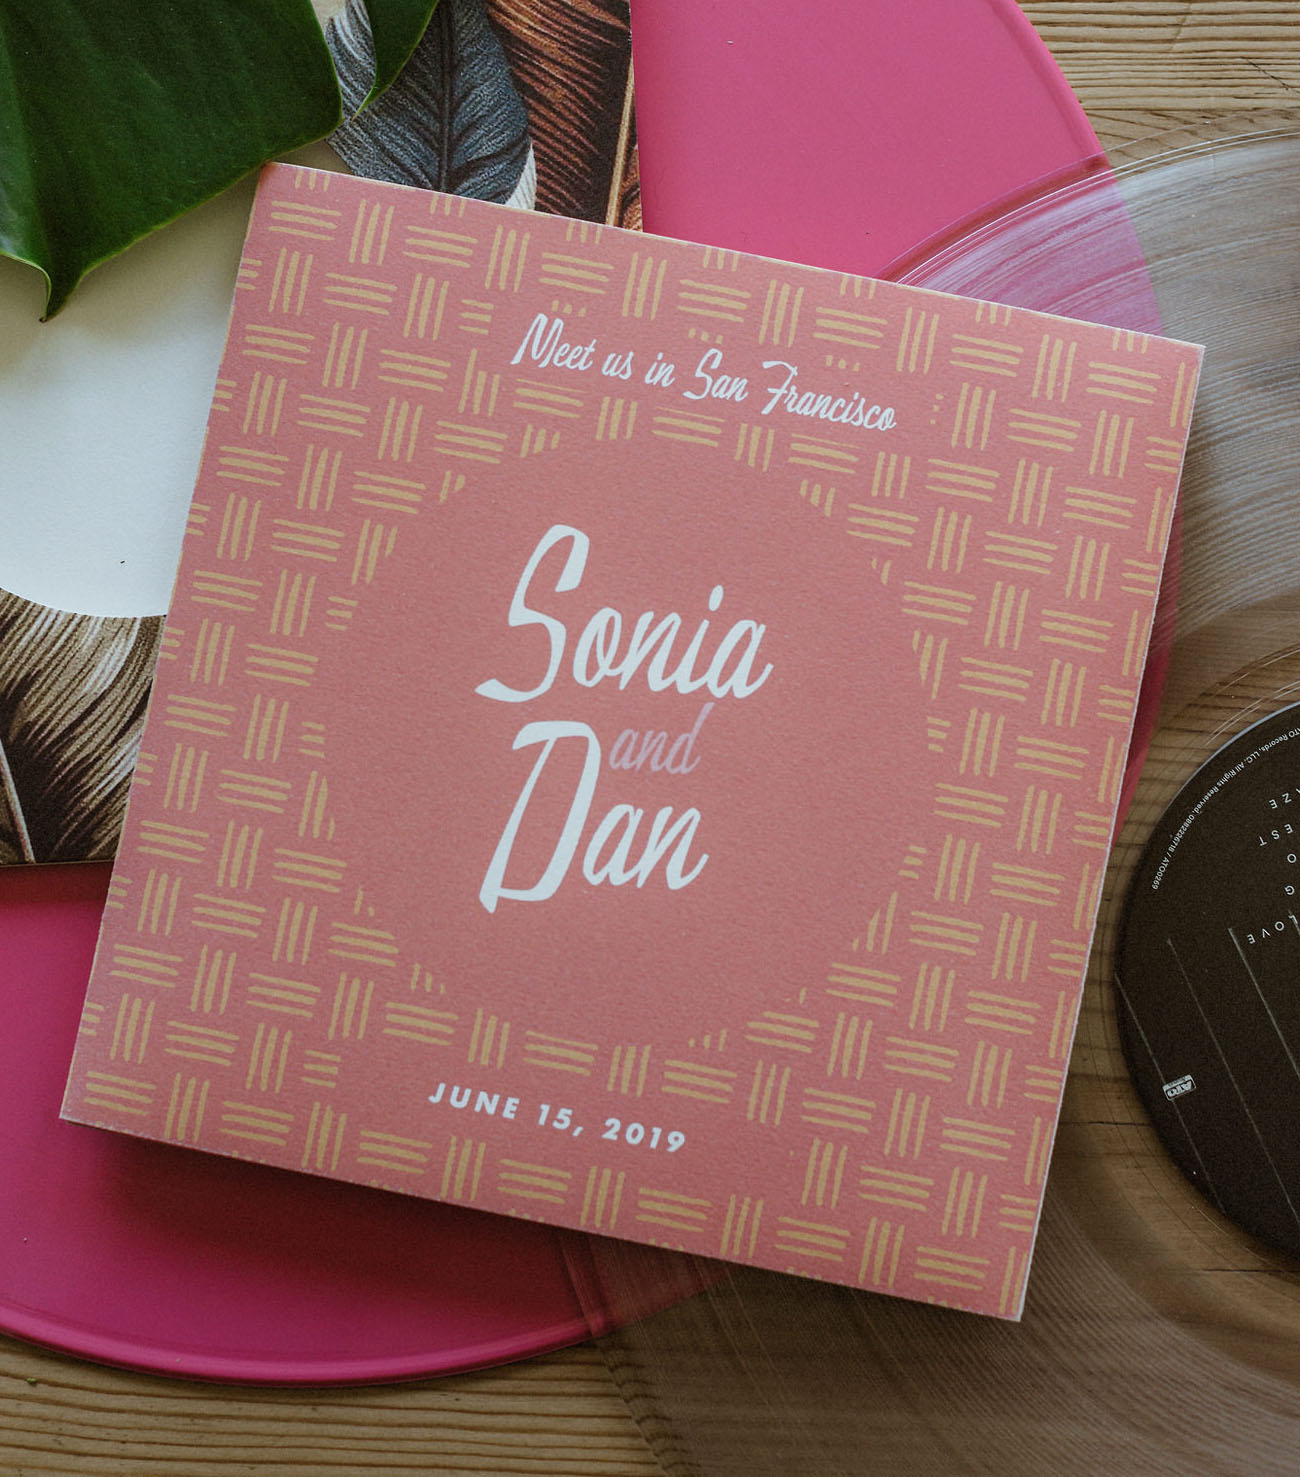 The wedding invitations looked like old fashioned records